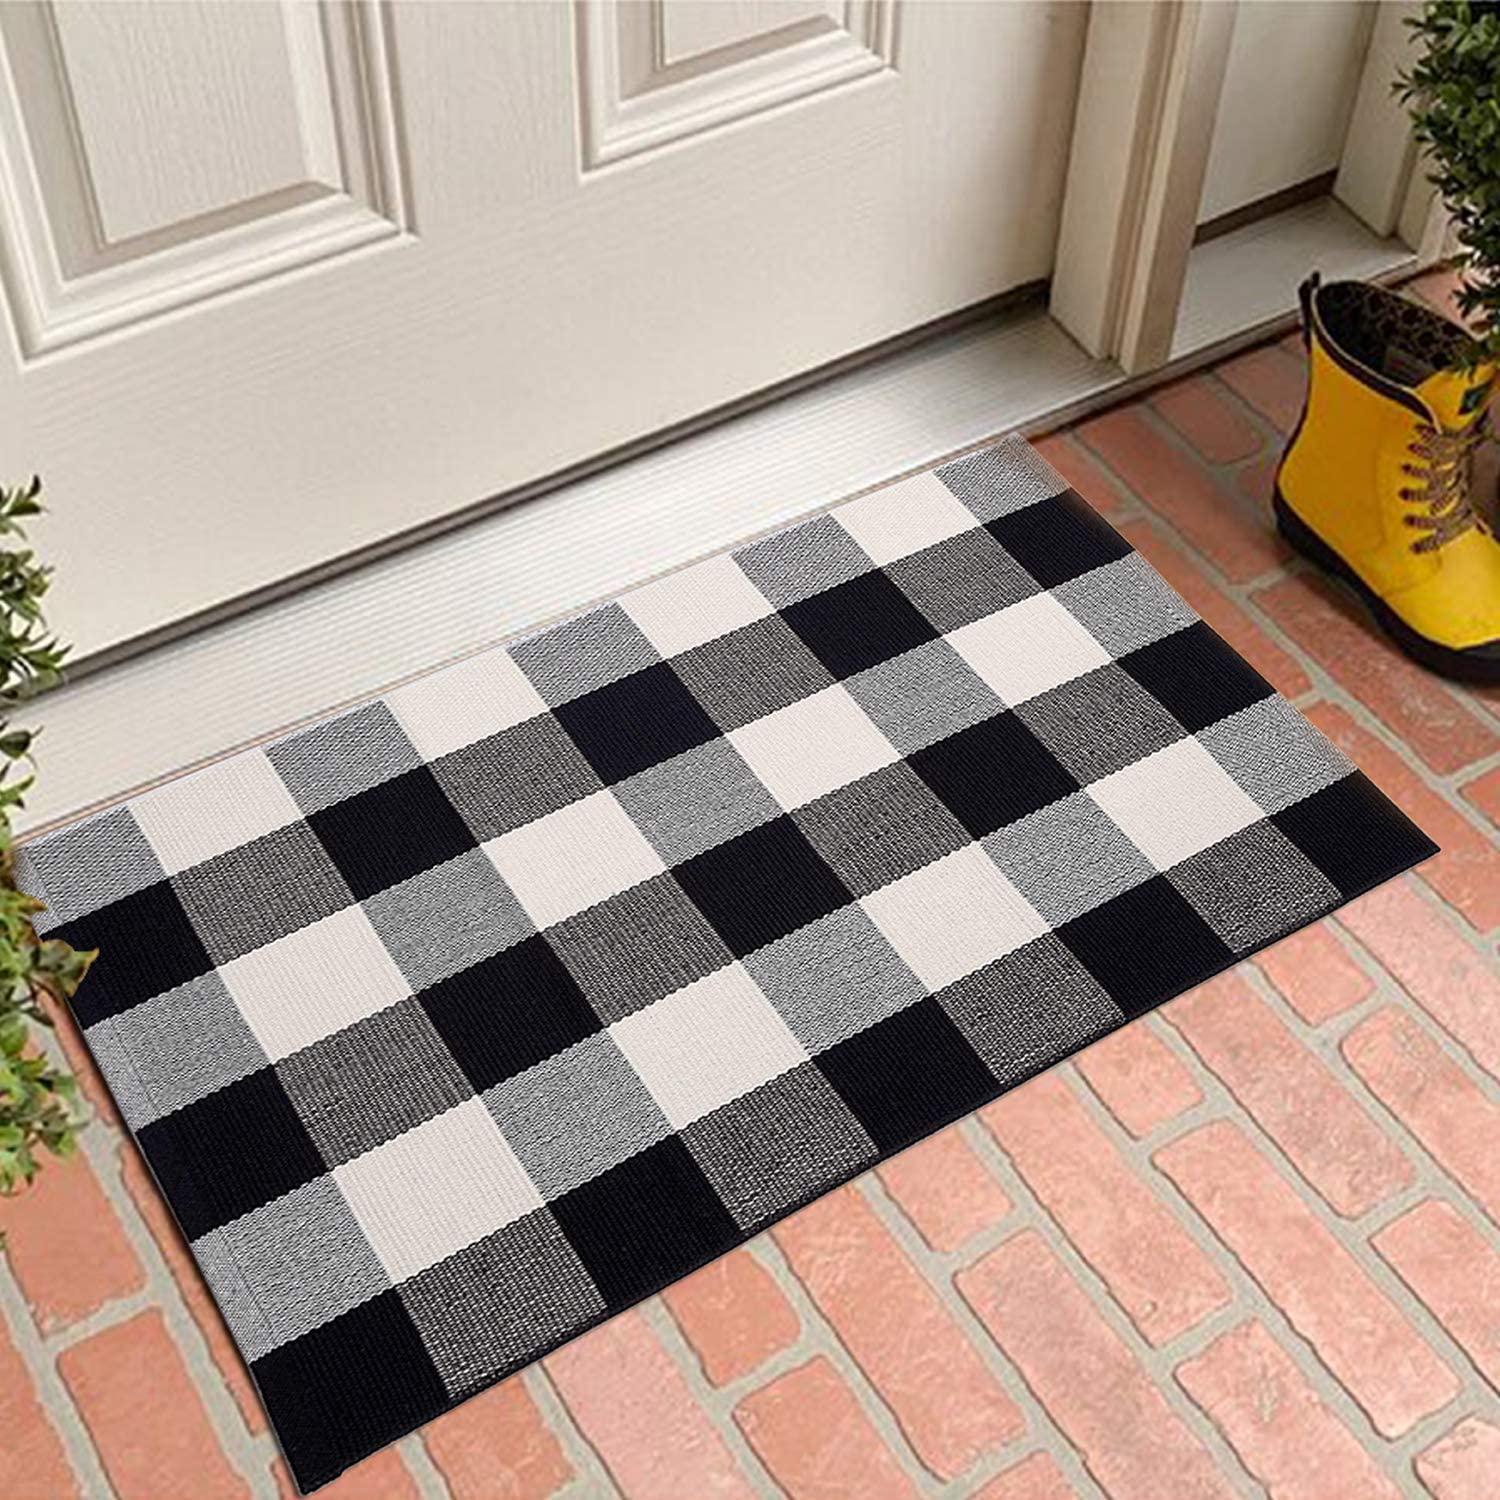 Cotton Buffalo Plaid Rugs Black and White Checkered Rug Welcome Door Mat (17.7"x27.5") Rug for Kitchen Carpet Bathroom Outdoor Porch Laundry Living Room Braided Throw Mat Washable Woven Buffalo Check - image 1 of 8